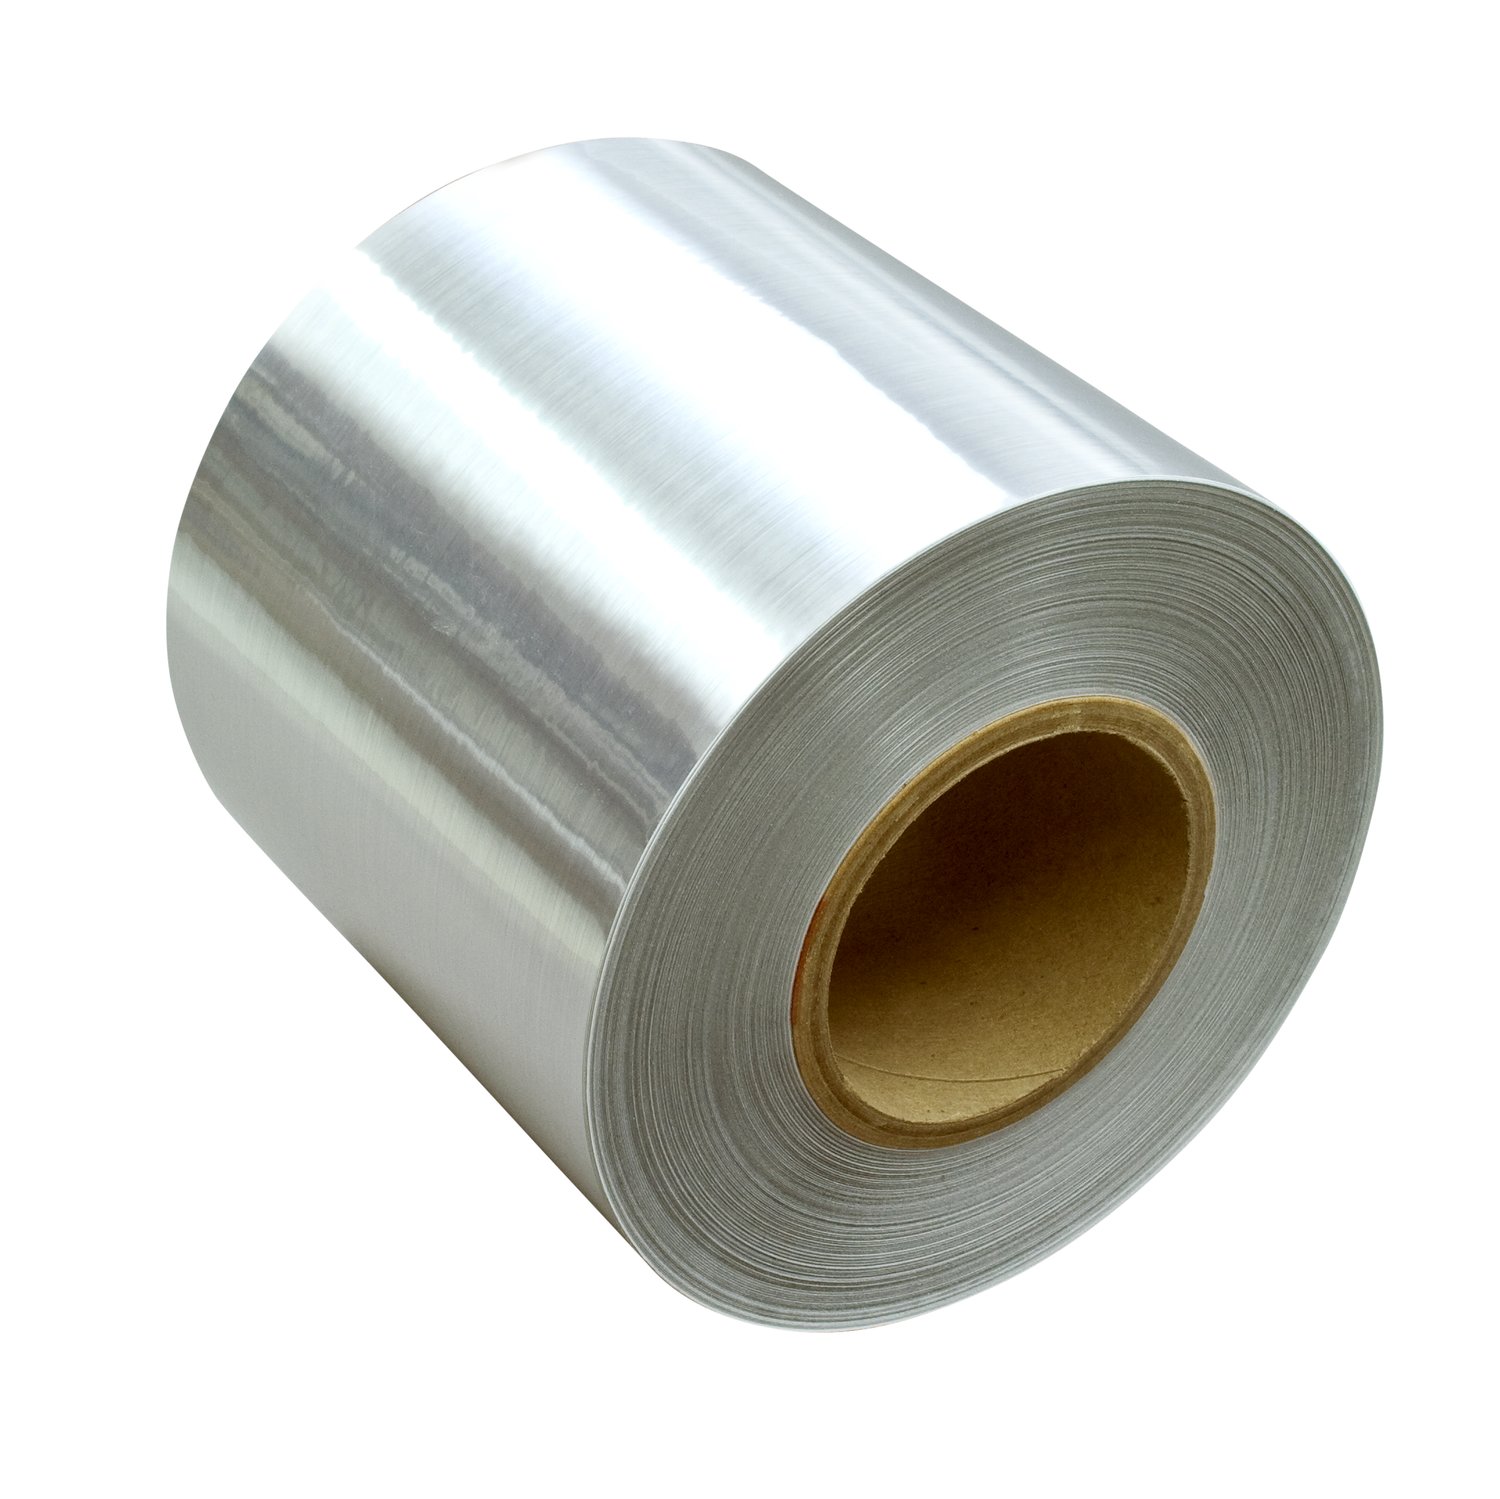 7100056932 - 3M Sheet and Screen Label Material 7028, Brushed Silver Polyester,
Roll, Config